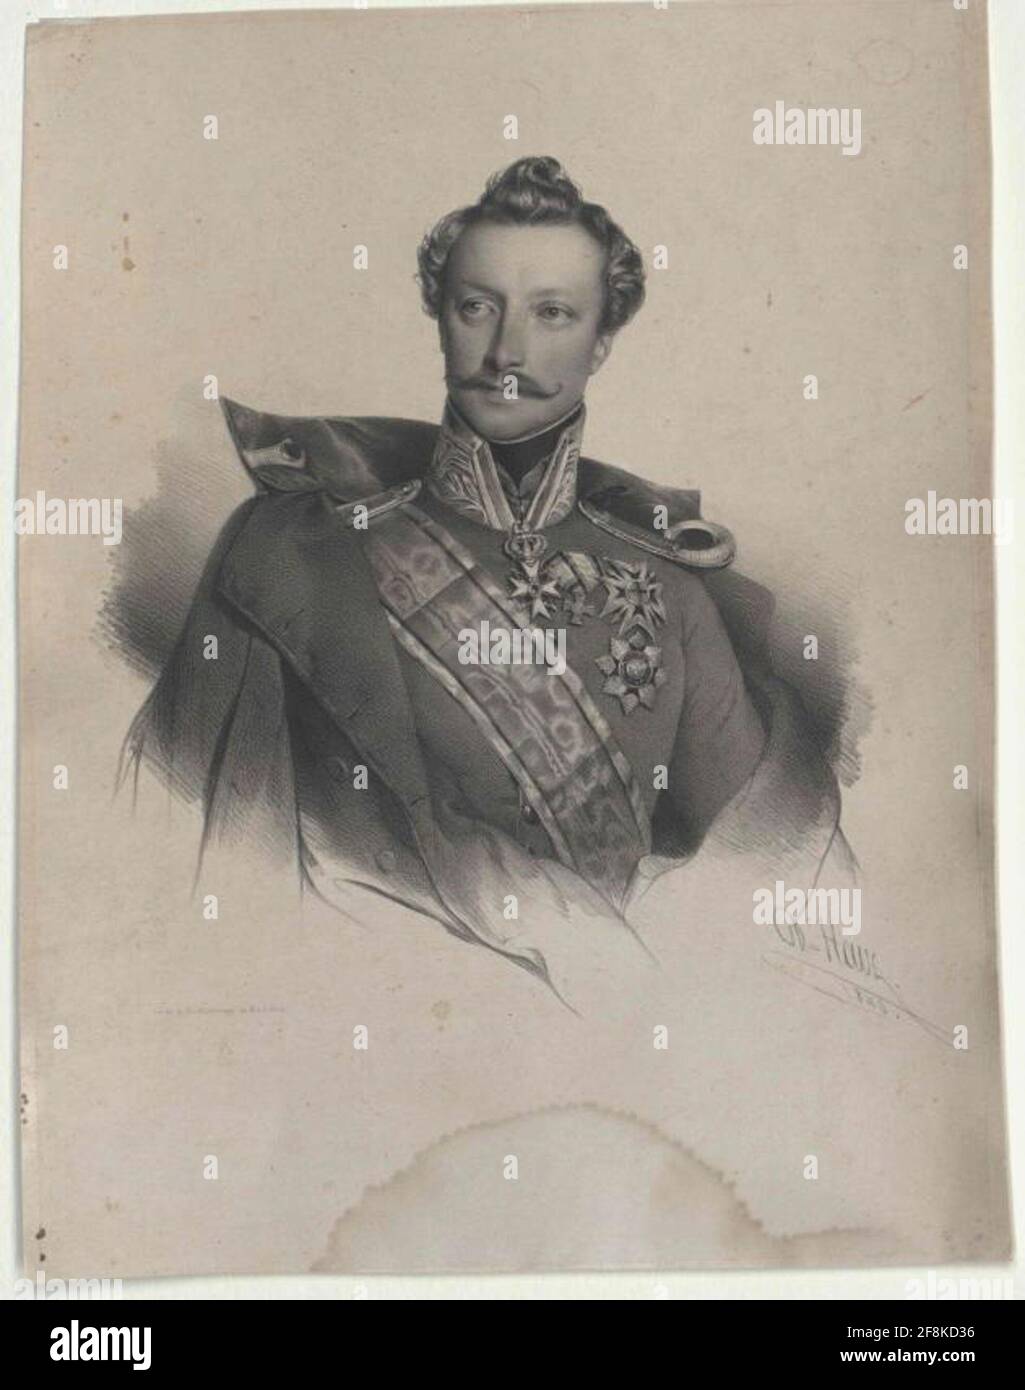 Thurn taxis, Karl Theodor Prince. Stock Photo